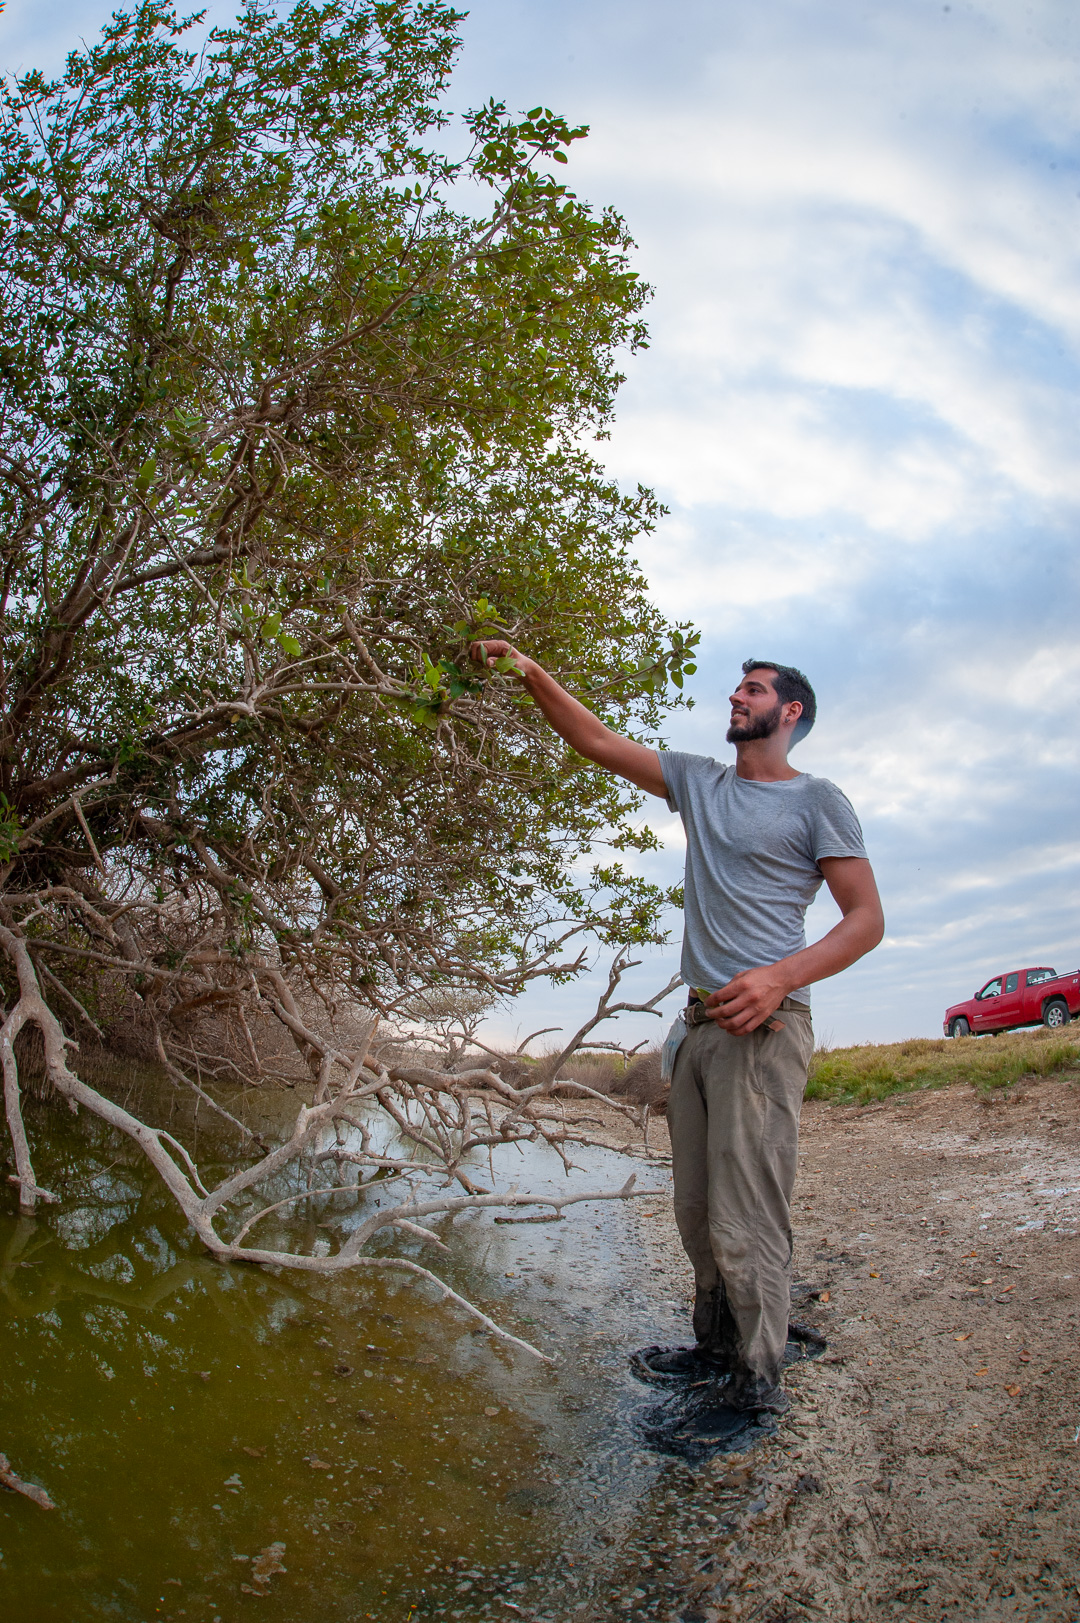 NYU Abu Dhabi Researchers Publish Important New Findings On The Study Of Mangrove Biology